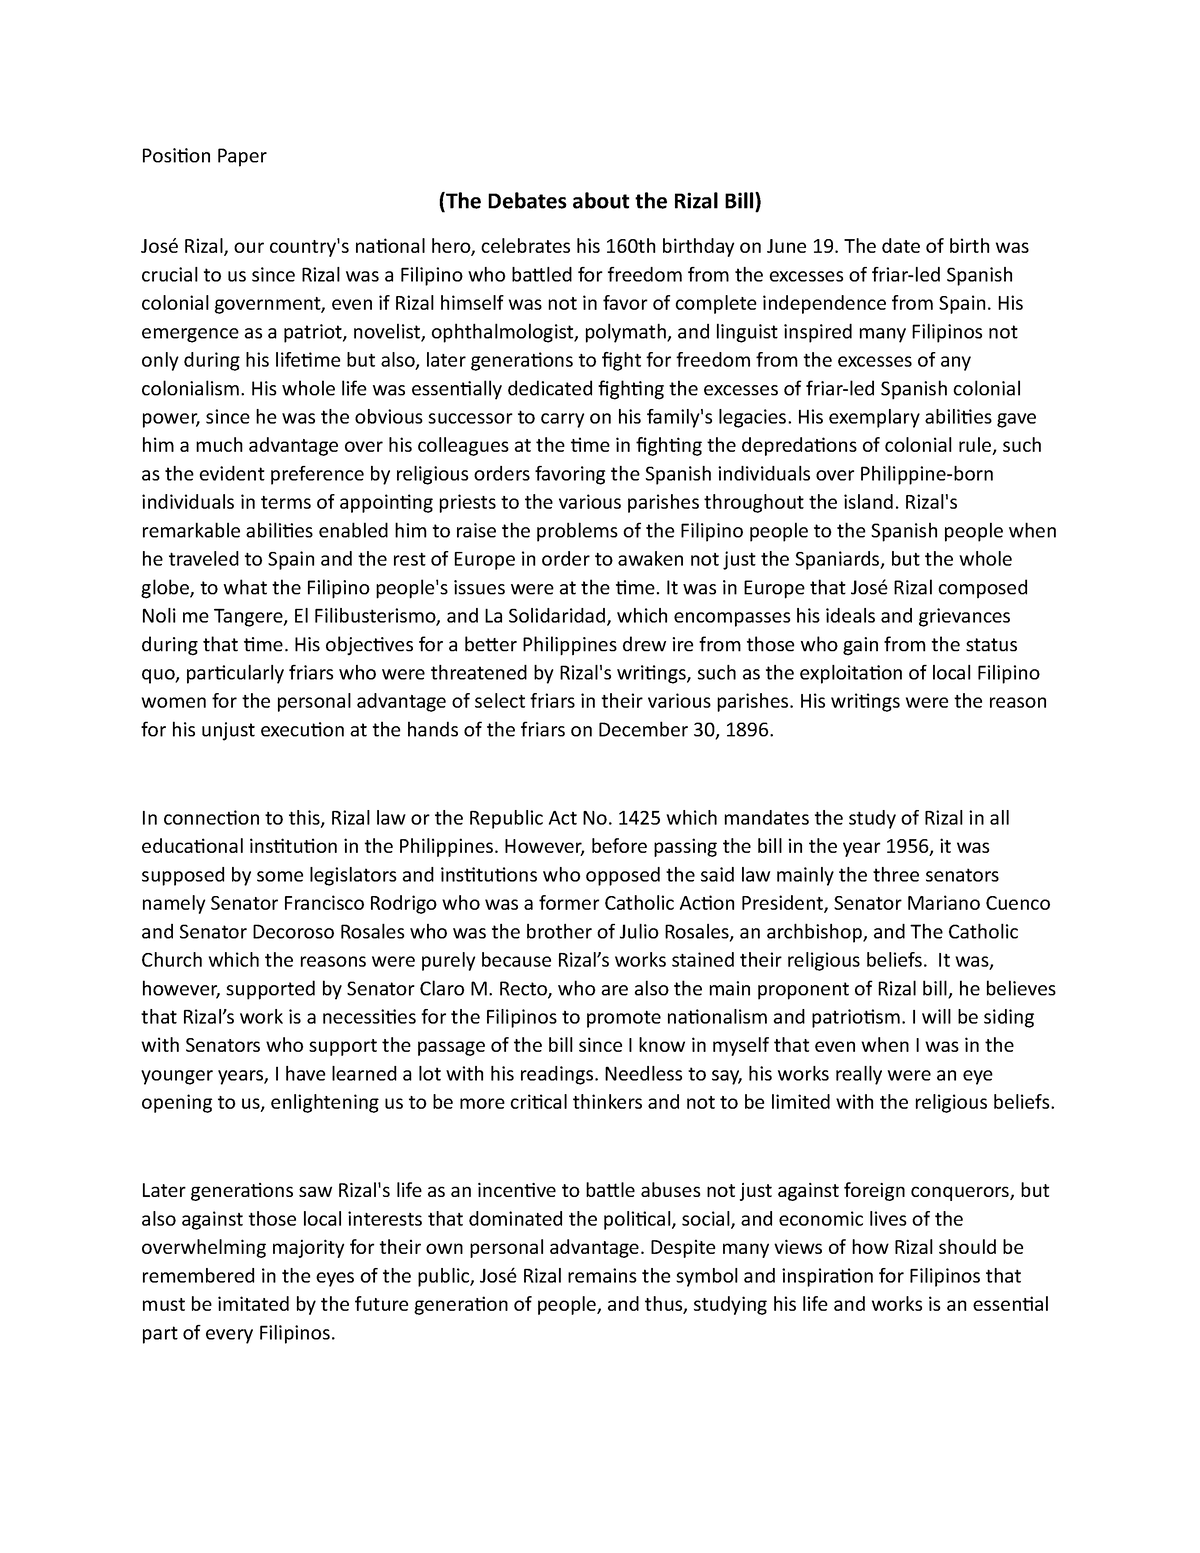 Position Paper - Position Paper (The Debates about the Rizal Bill) José ...